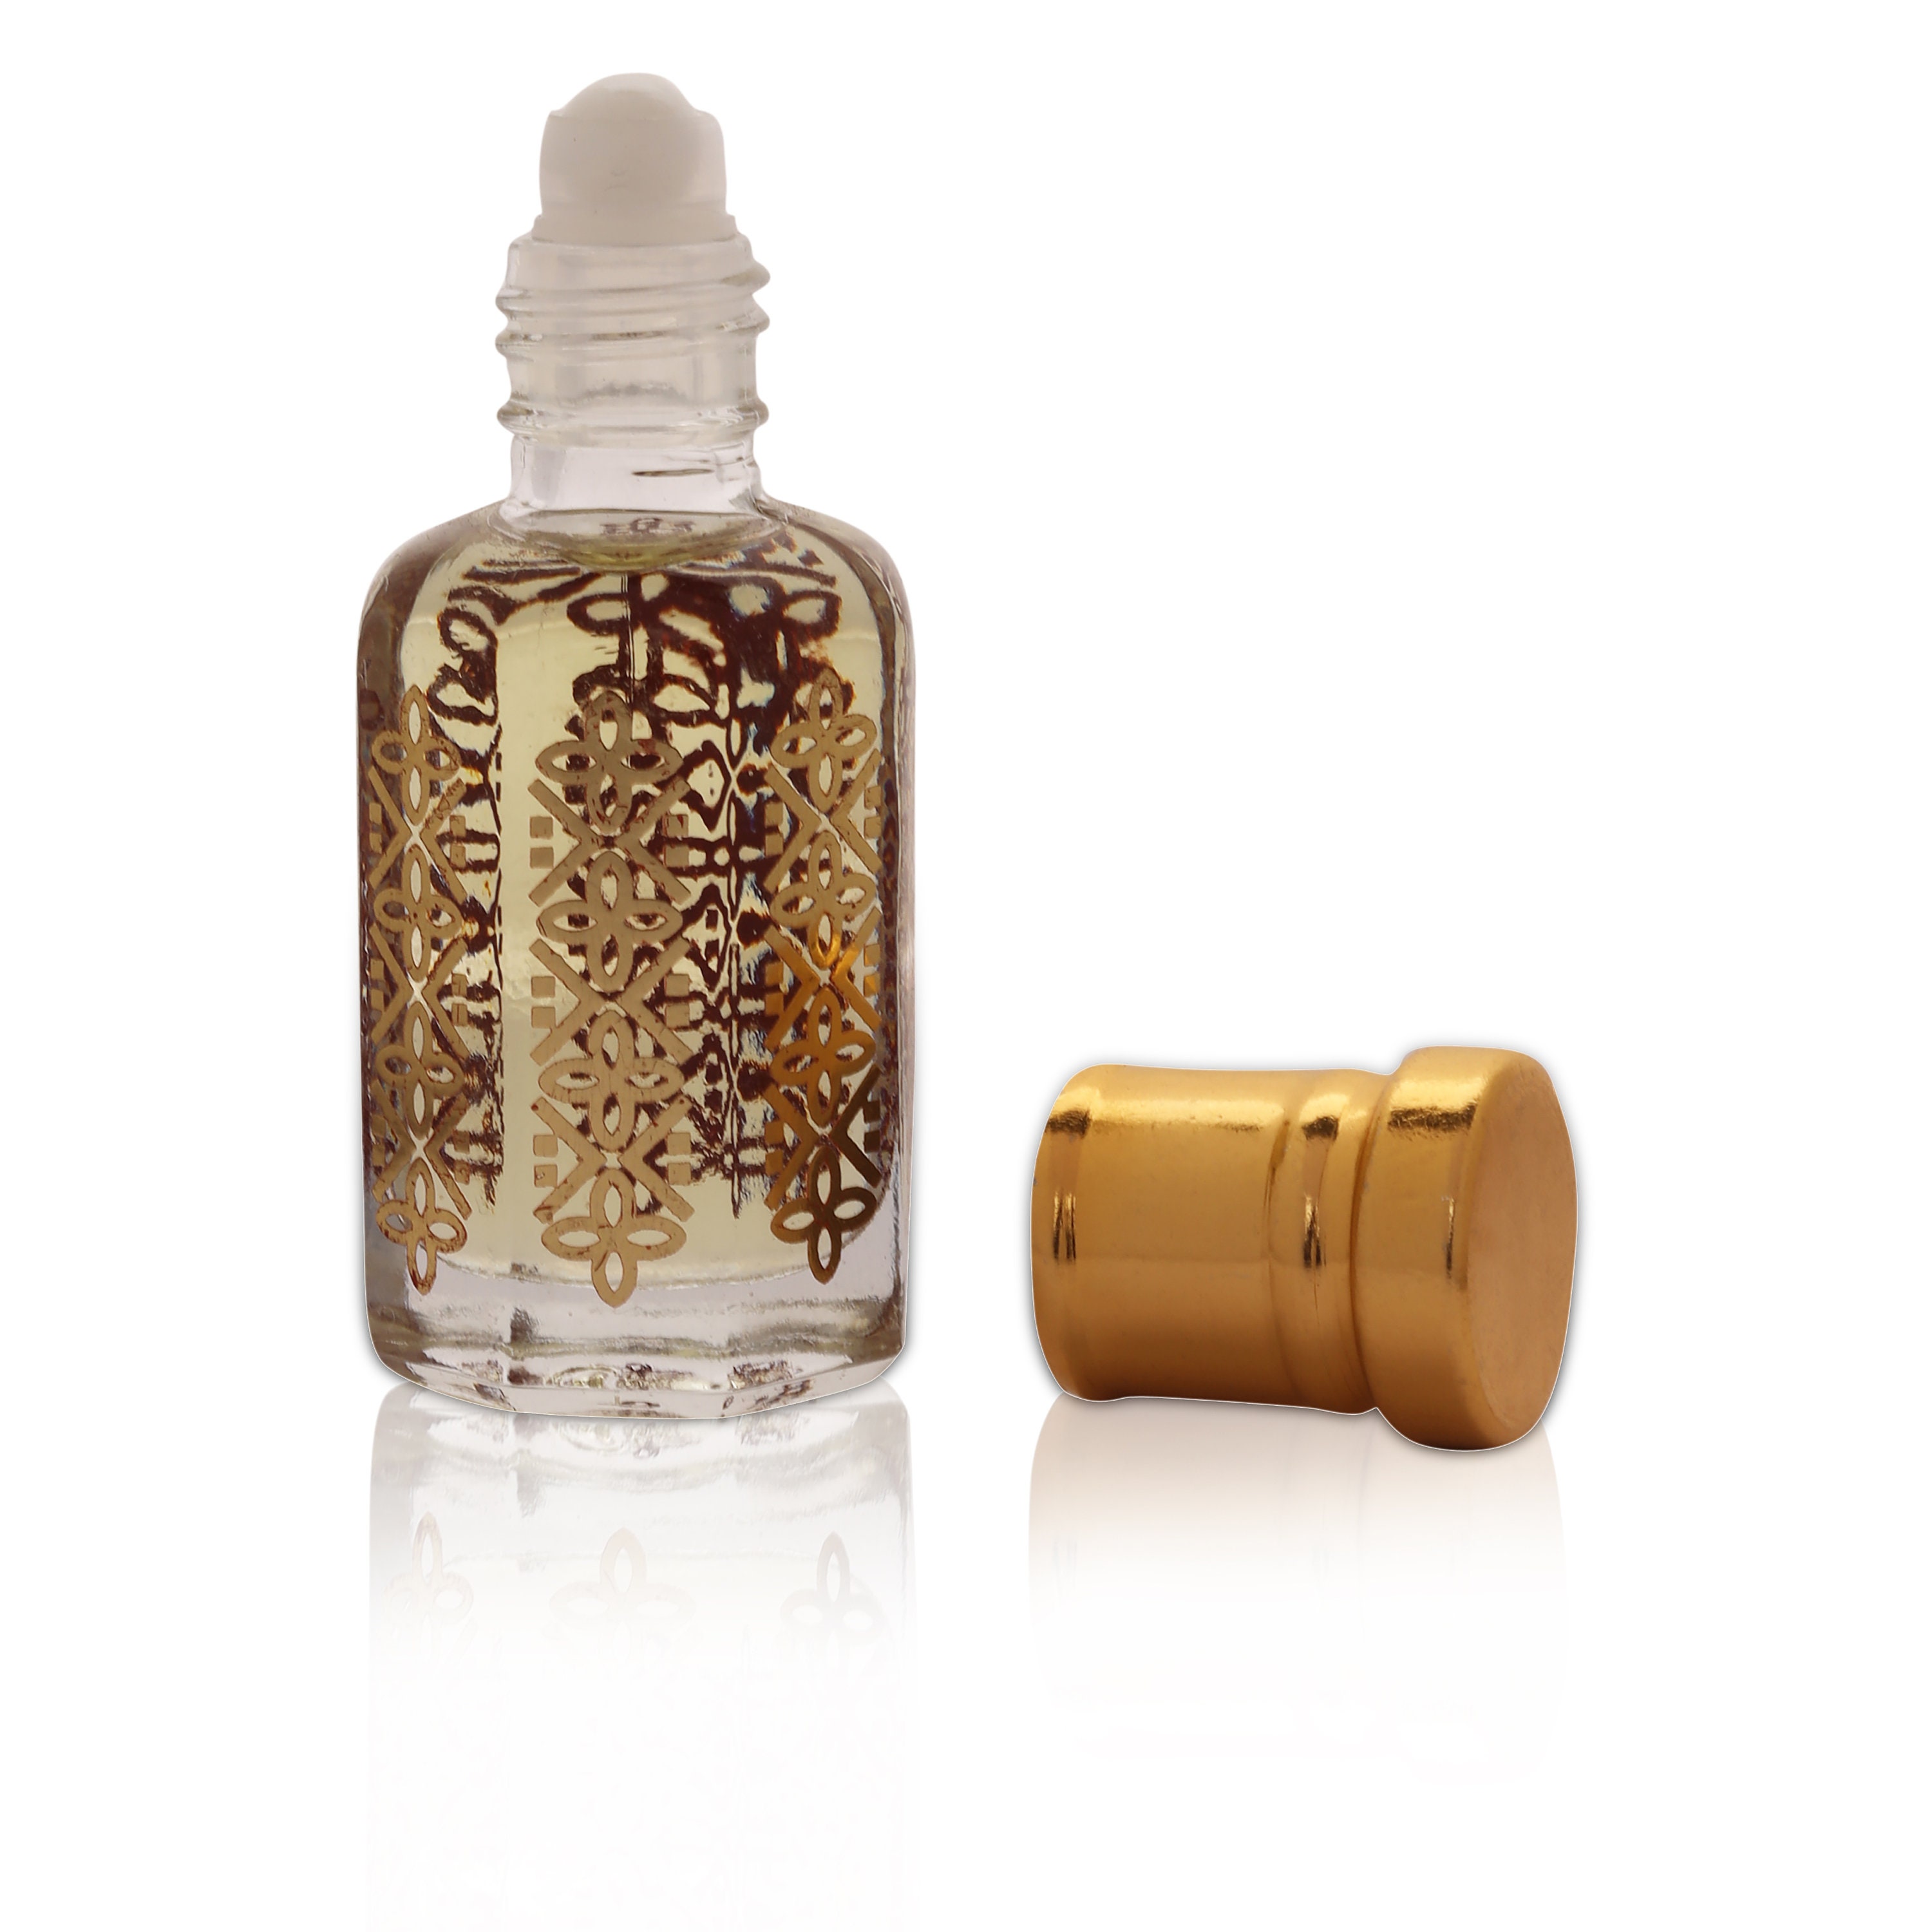 Musk Rizali by Dream Perfume Concentrated Perfume Attar Oil 